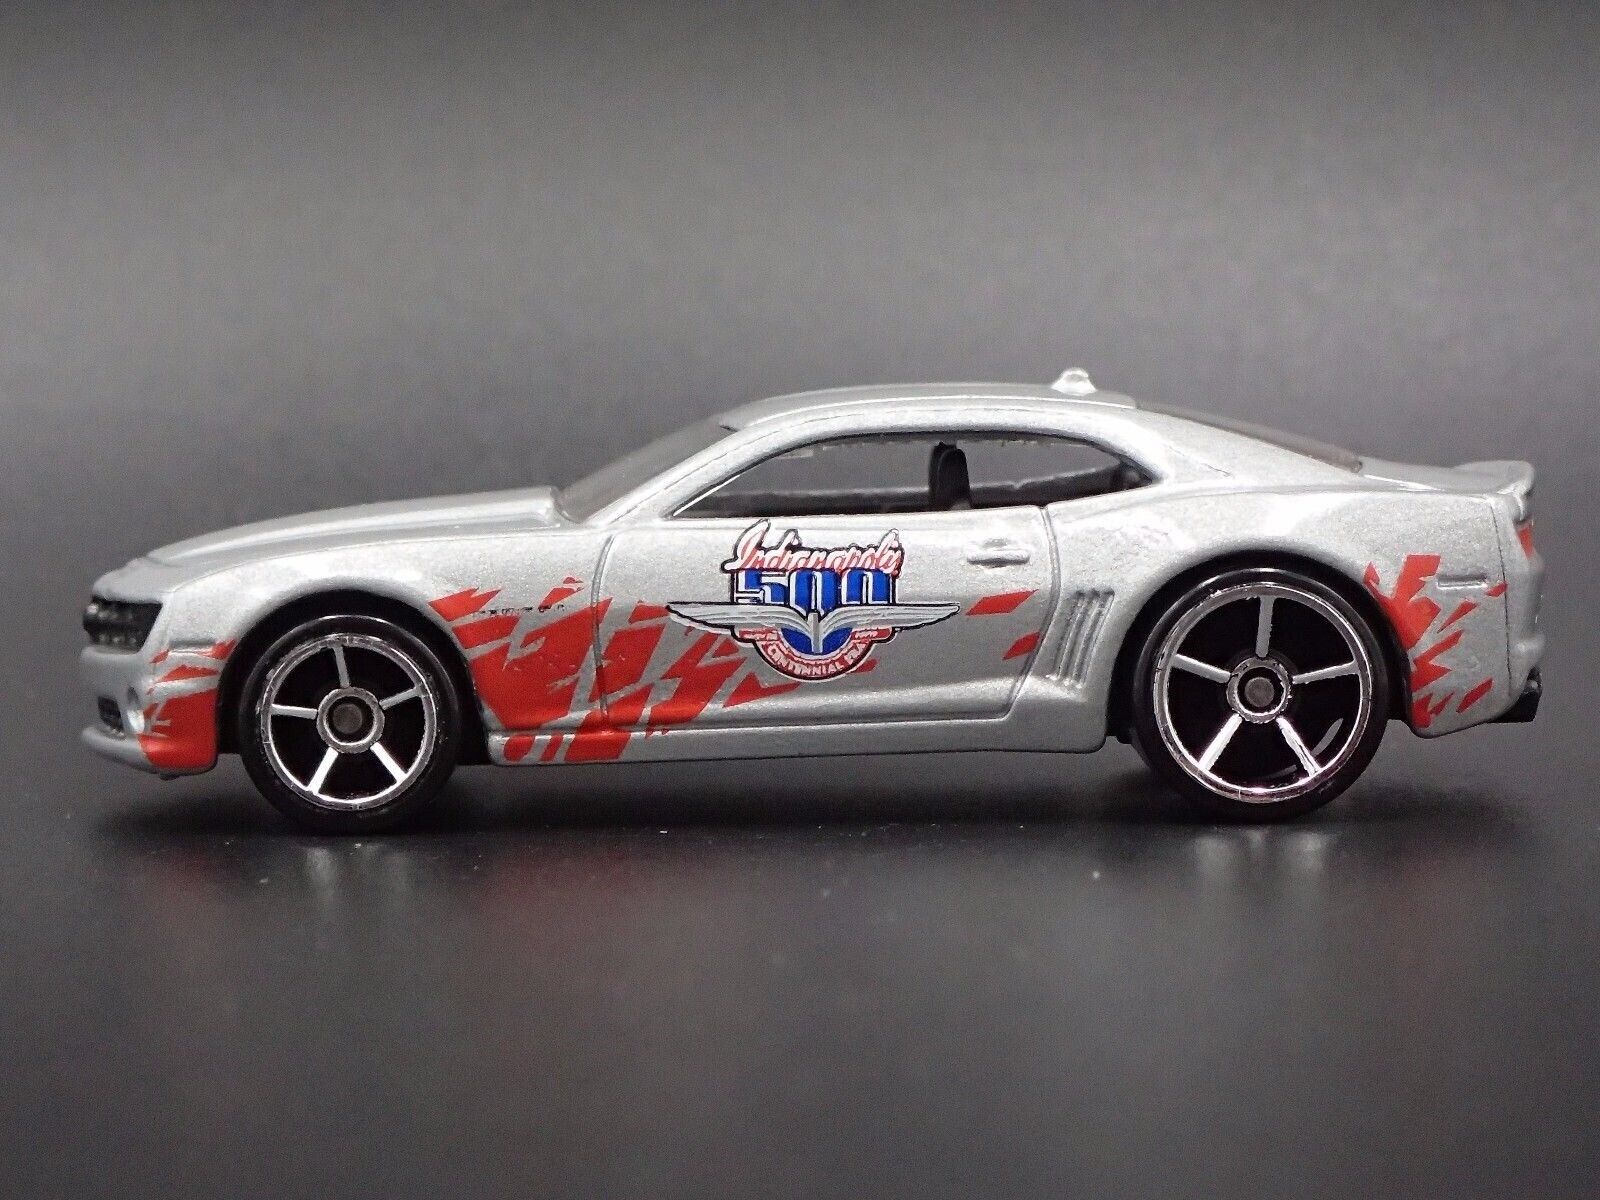 2010-2015 CHEVY CHEVROLET CAMARO INDY 500 PACE CAR 1:64 SCALE DIECAST MODEL CAR